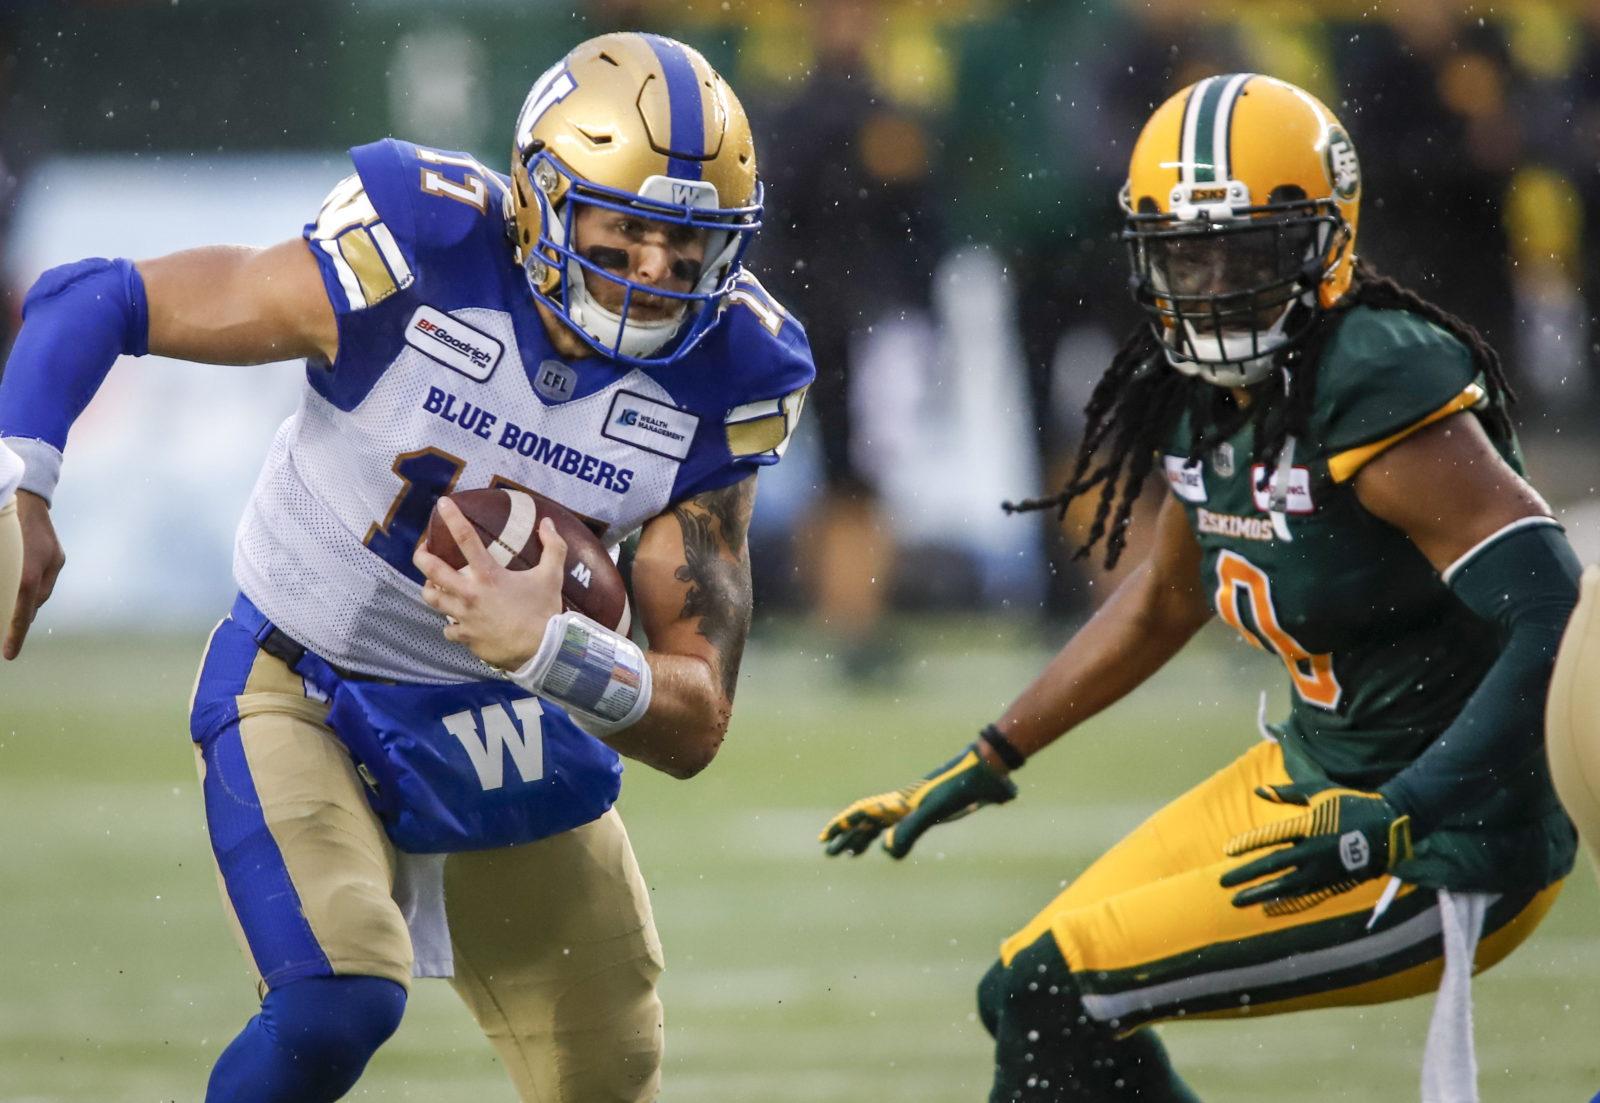 Upon Further Review. WPG 34 EDM 28 Blue Bombers